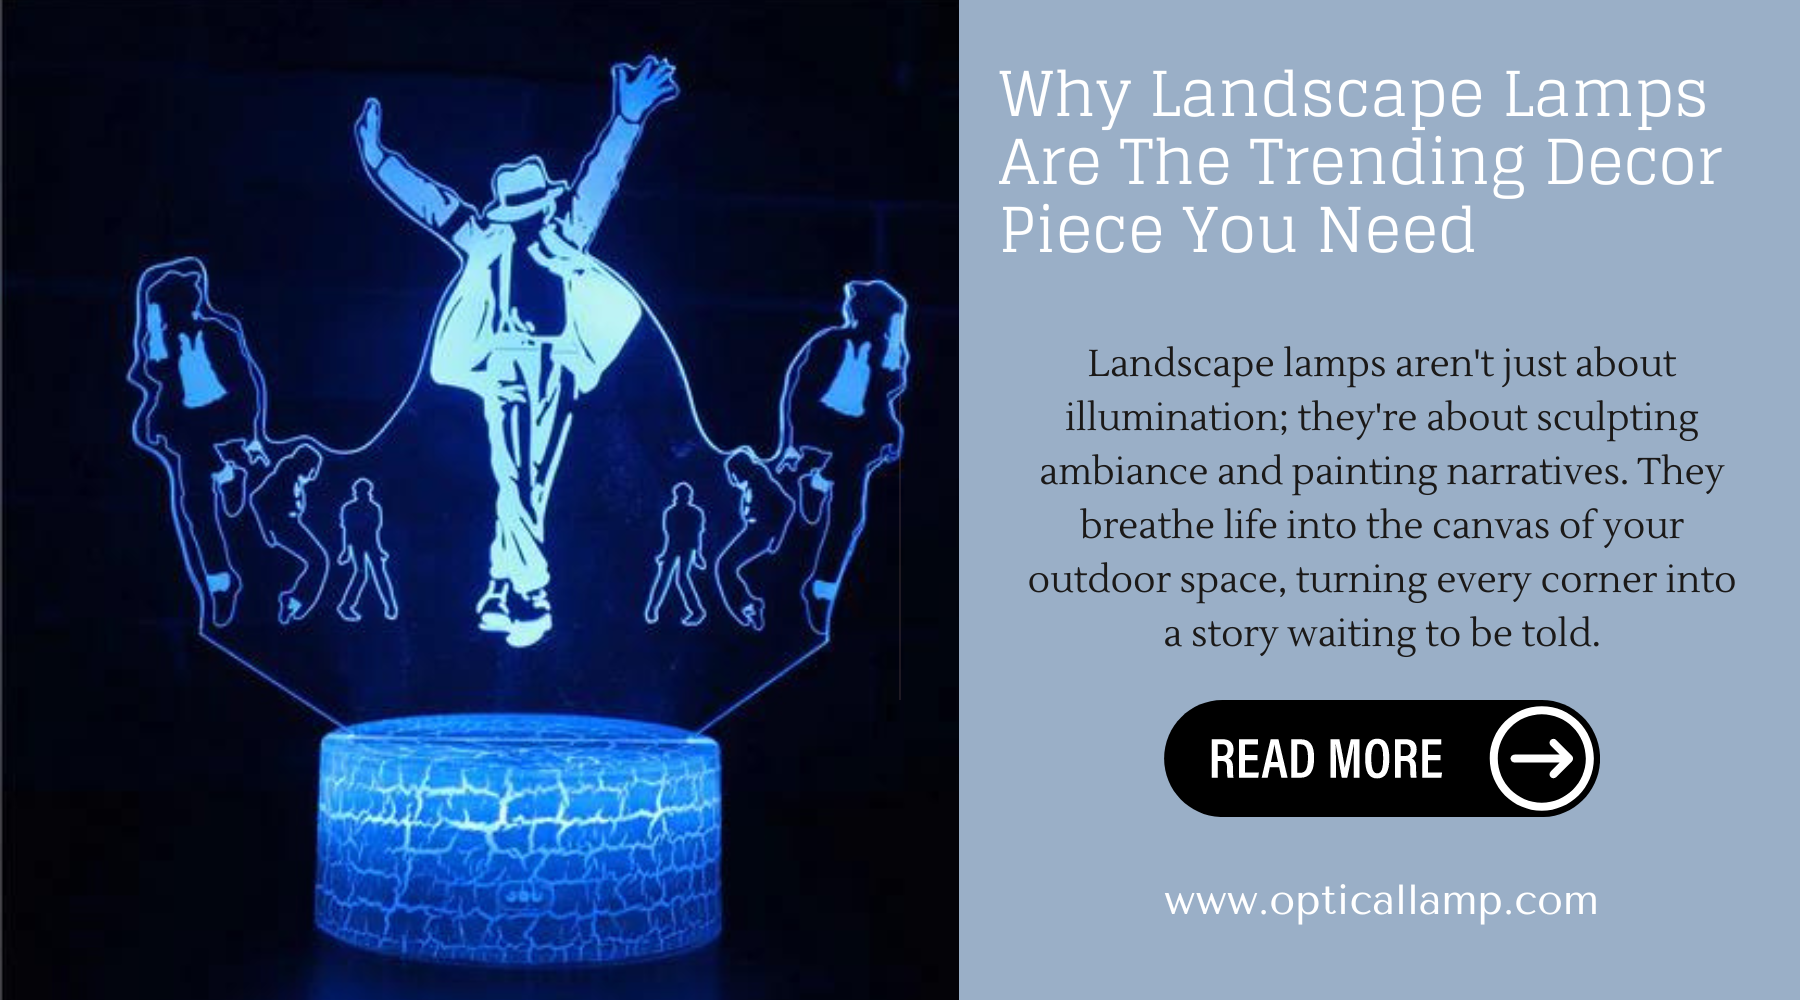 Why Landscape Lamps Are The Trending Decor Piece You Need